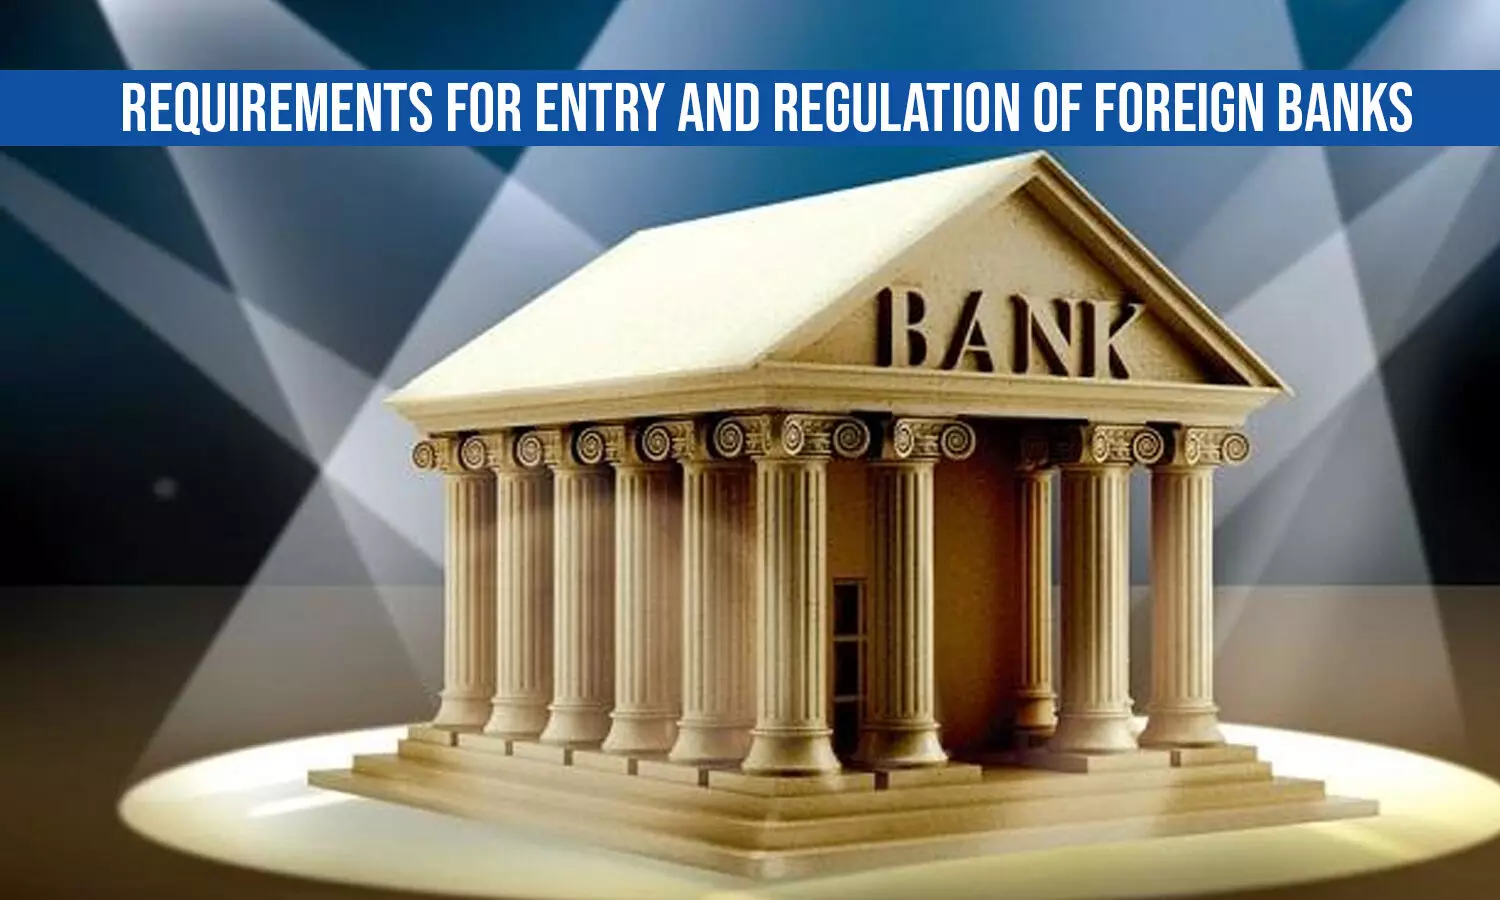 Requirements for Entry and Regulation of Foreign Banks